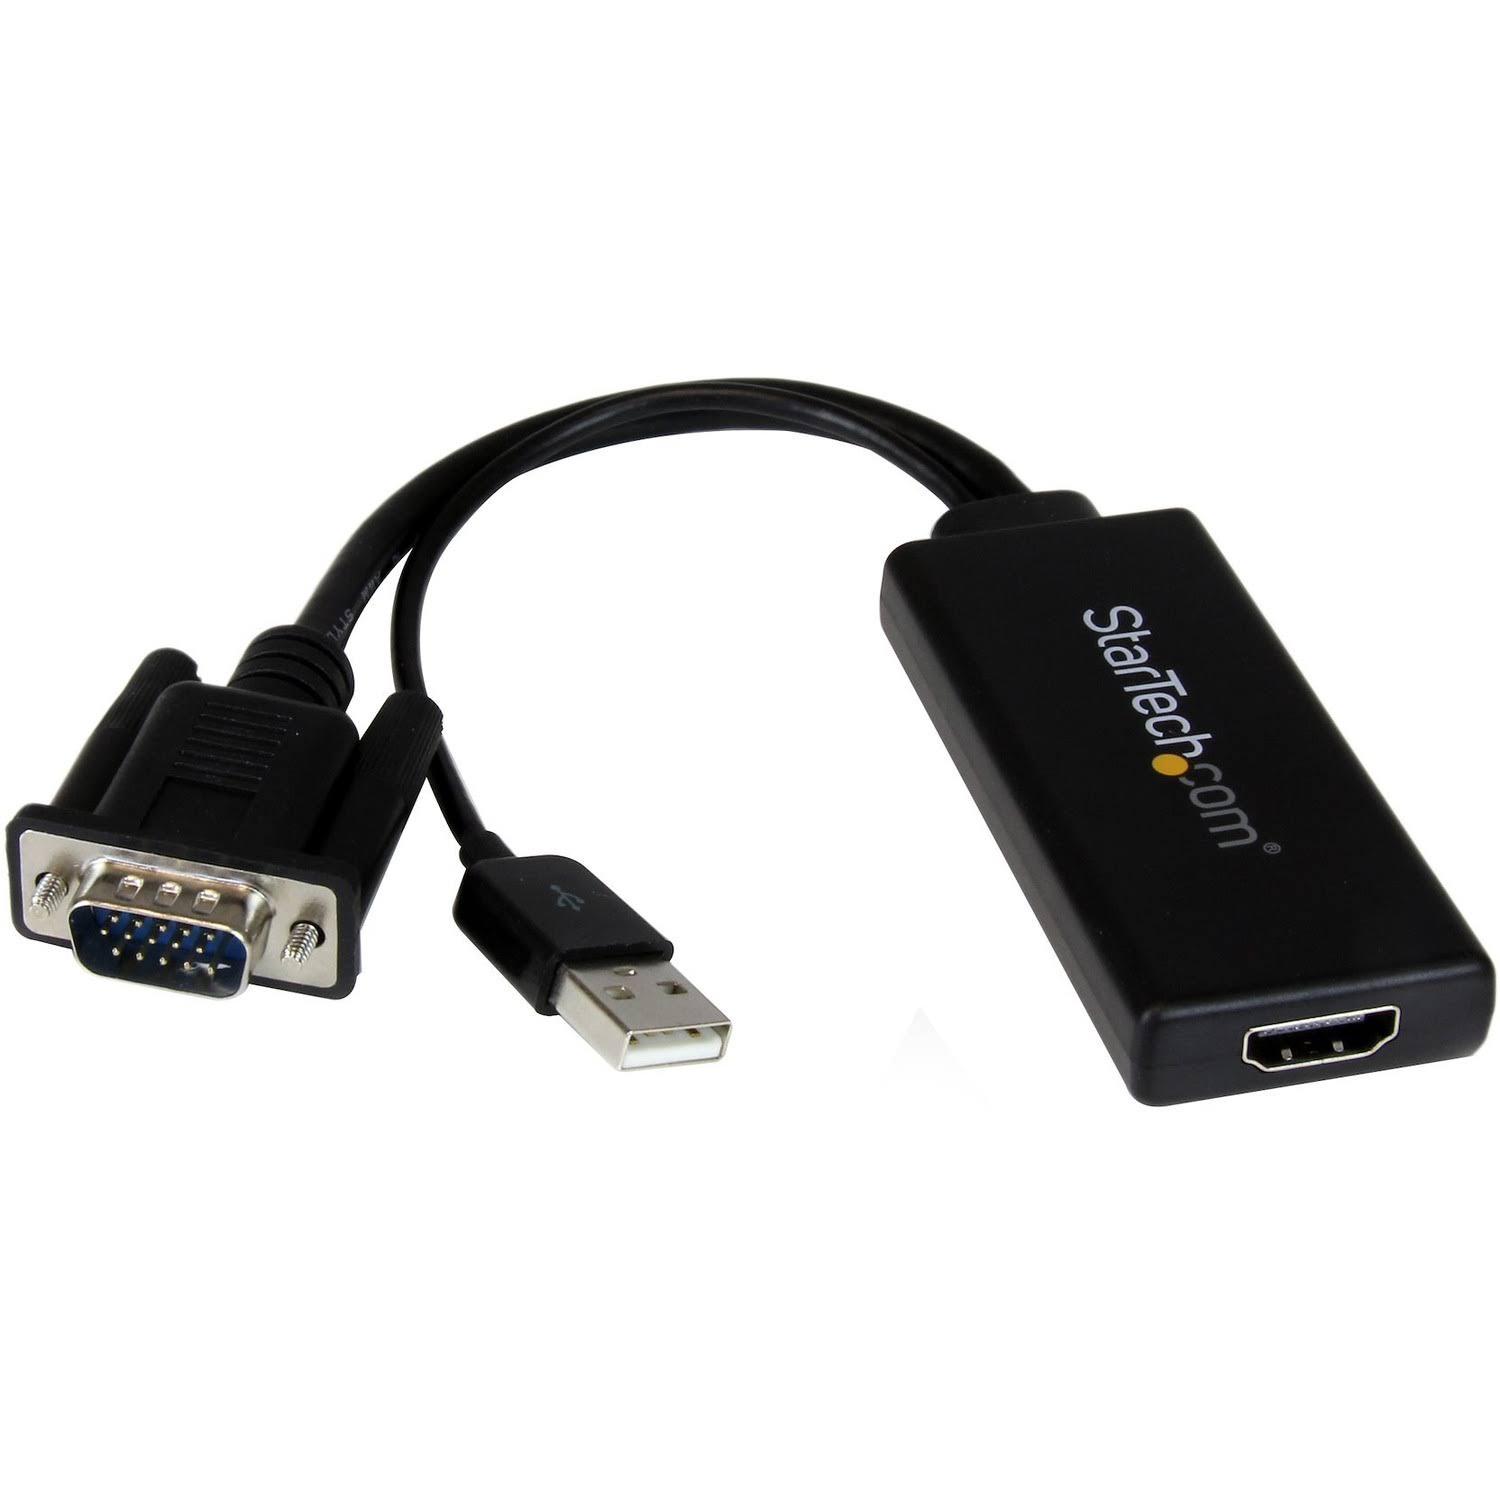 StarTech VGA to HDMI Adapter with USB Audio - Black